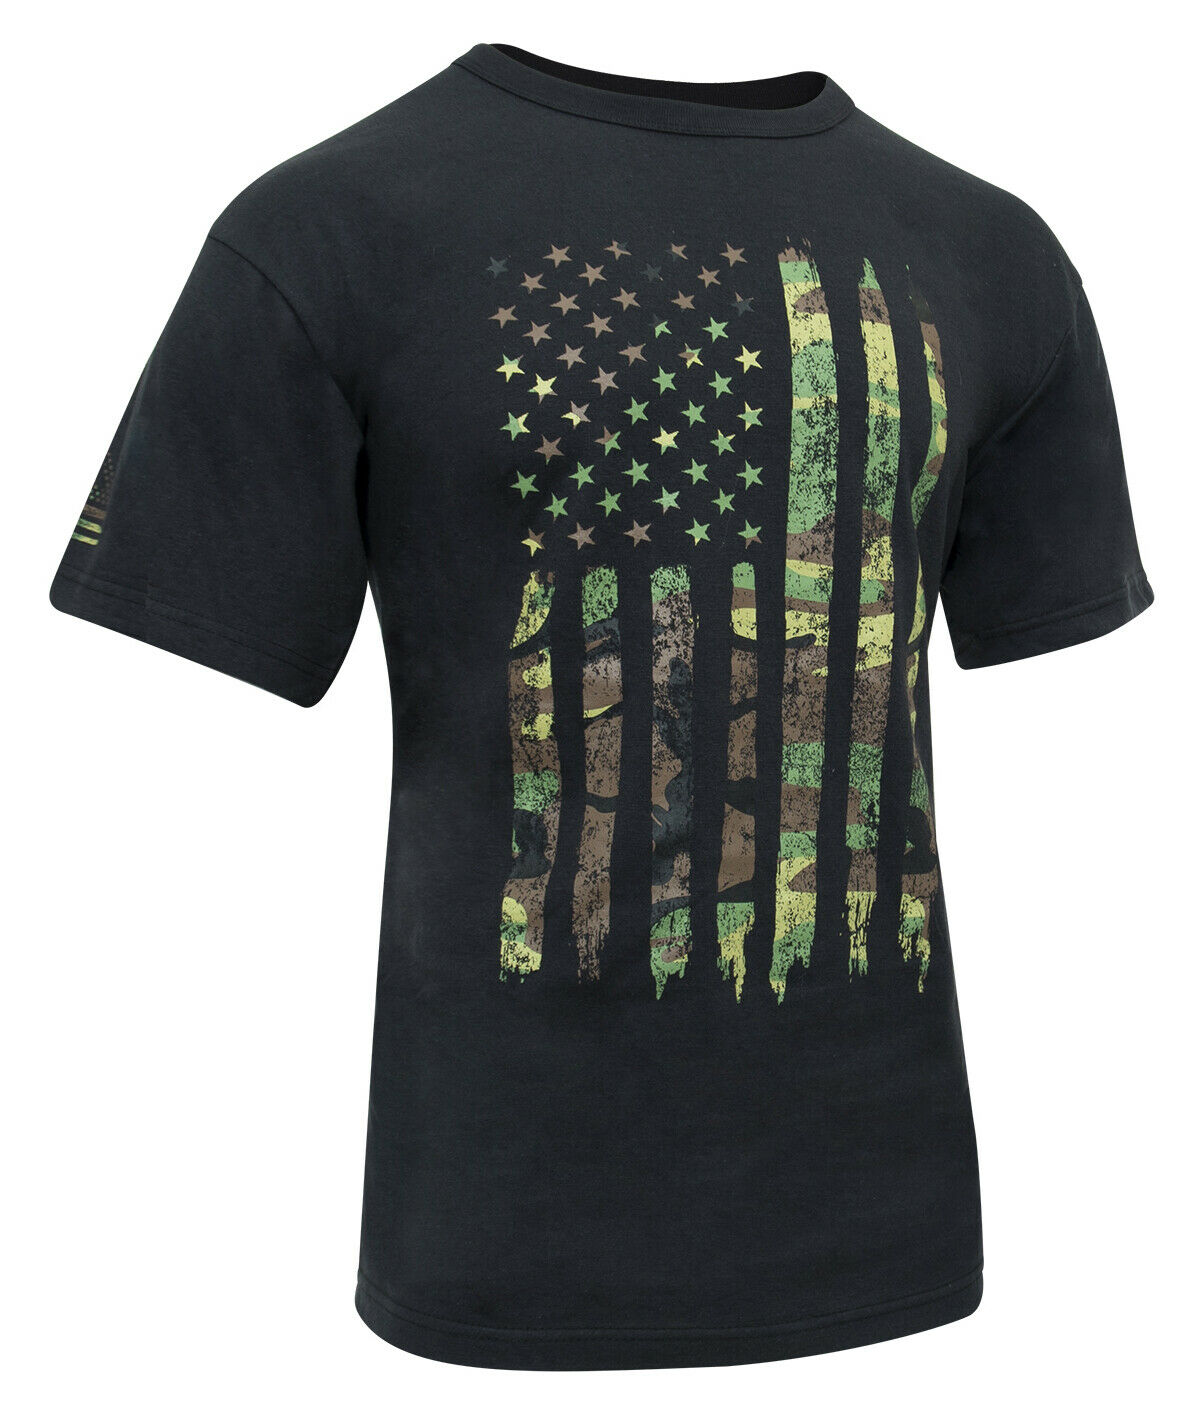 Rothco Distressed US Flag Athletic Fit T-Shirt - Camo